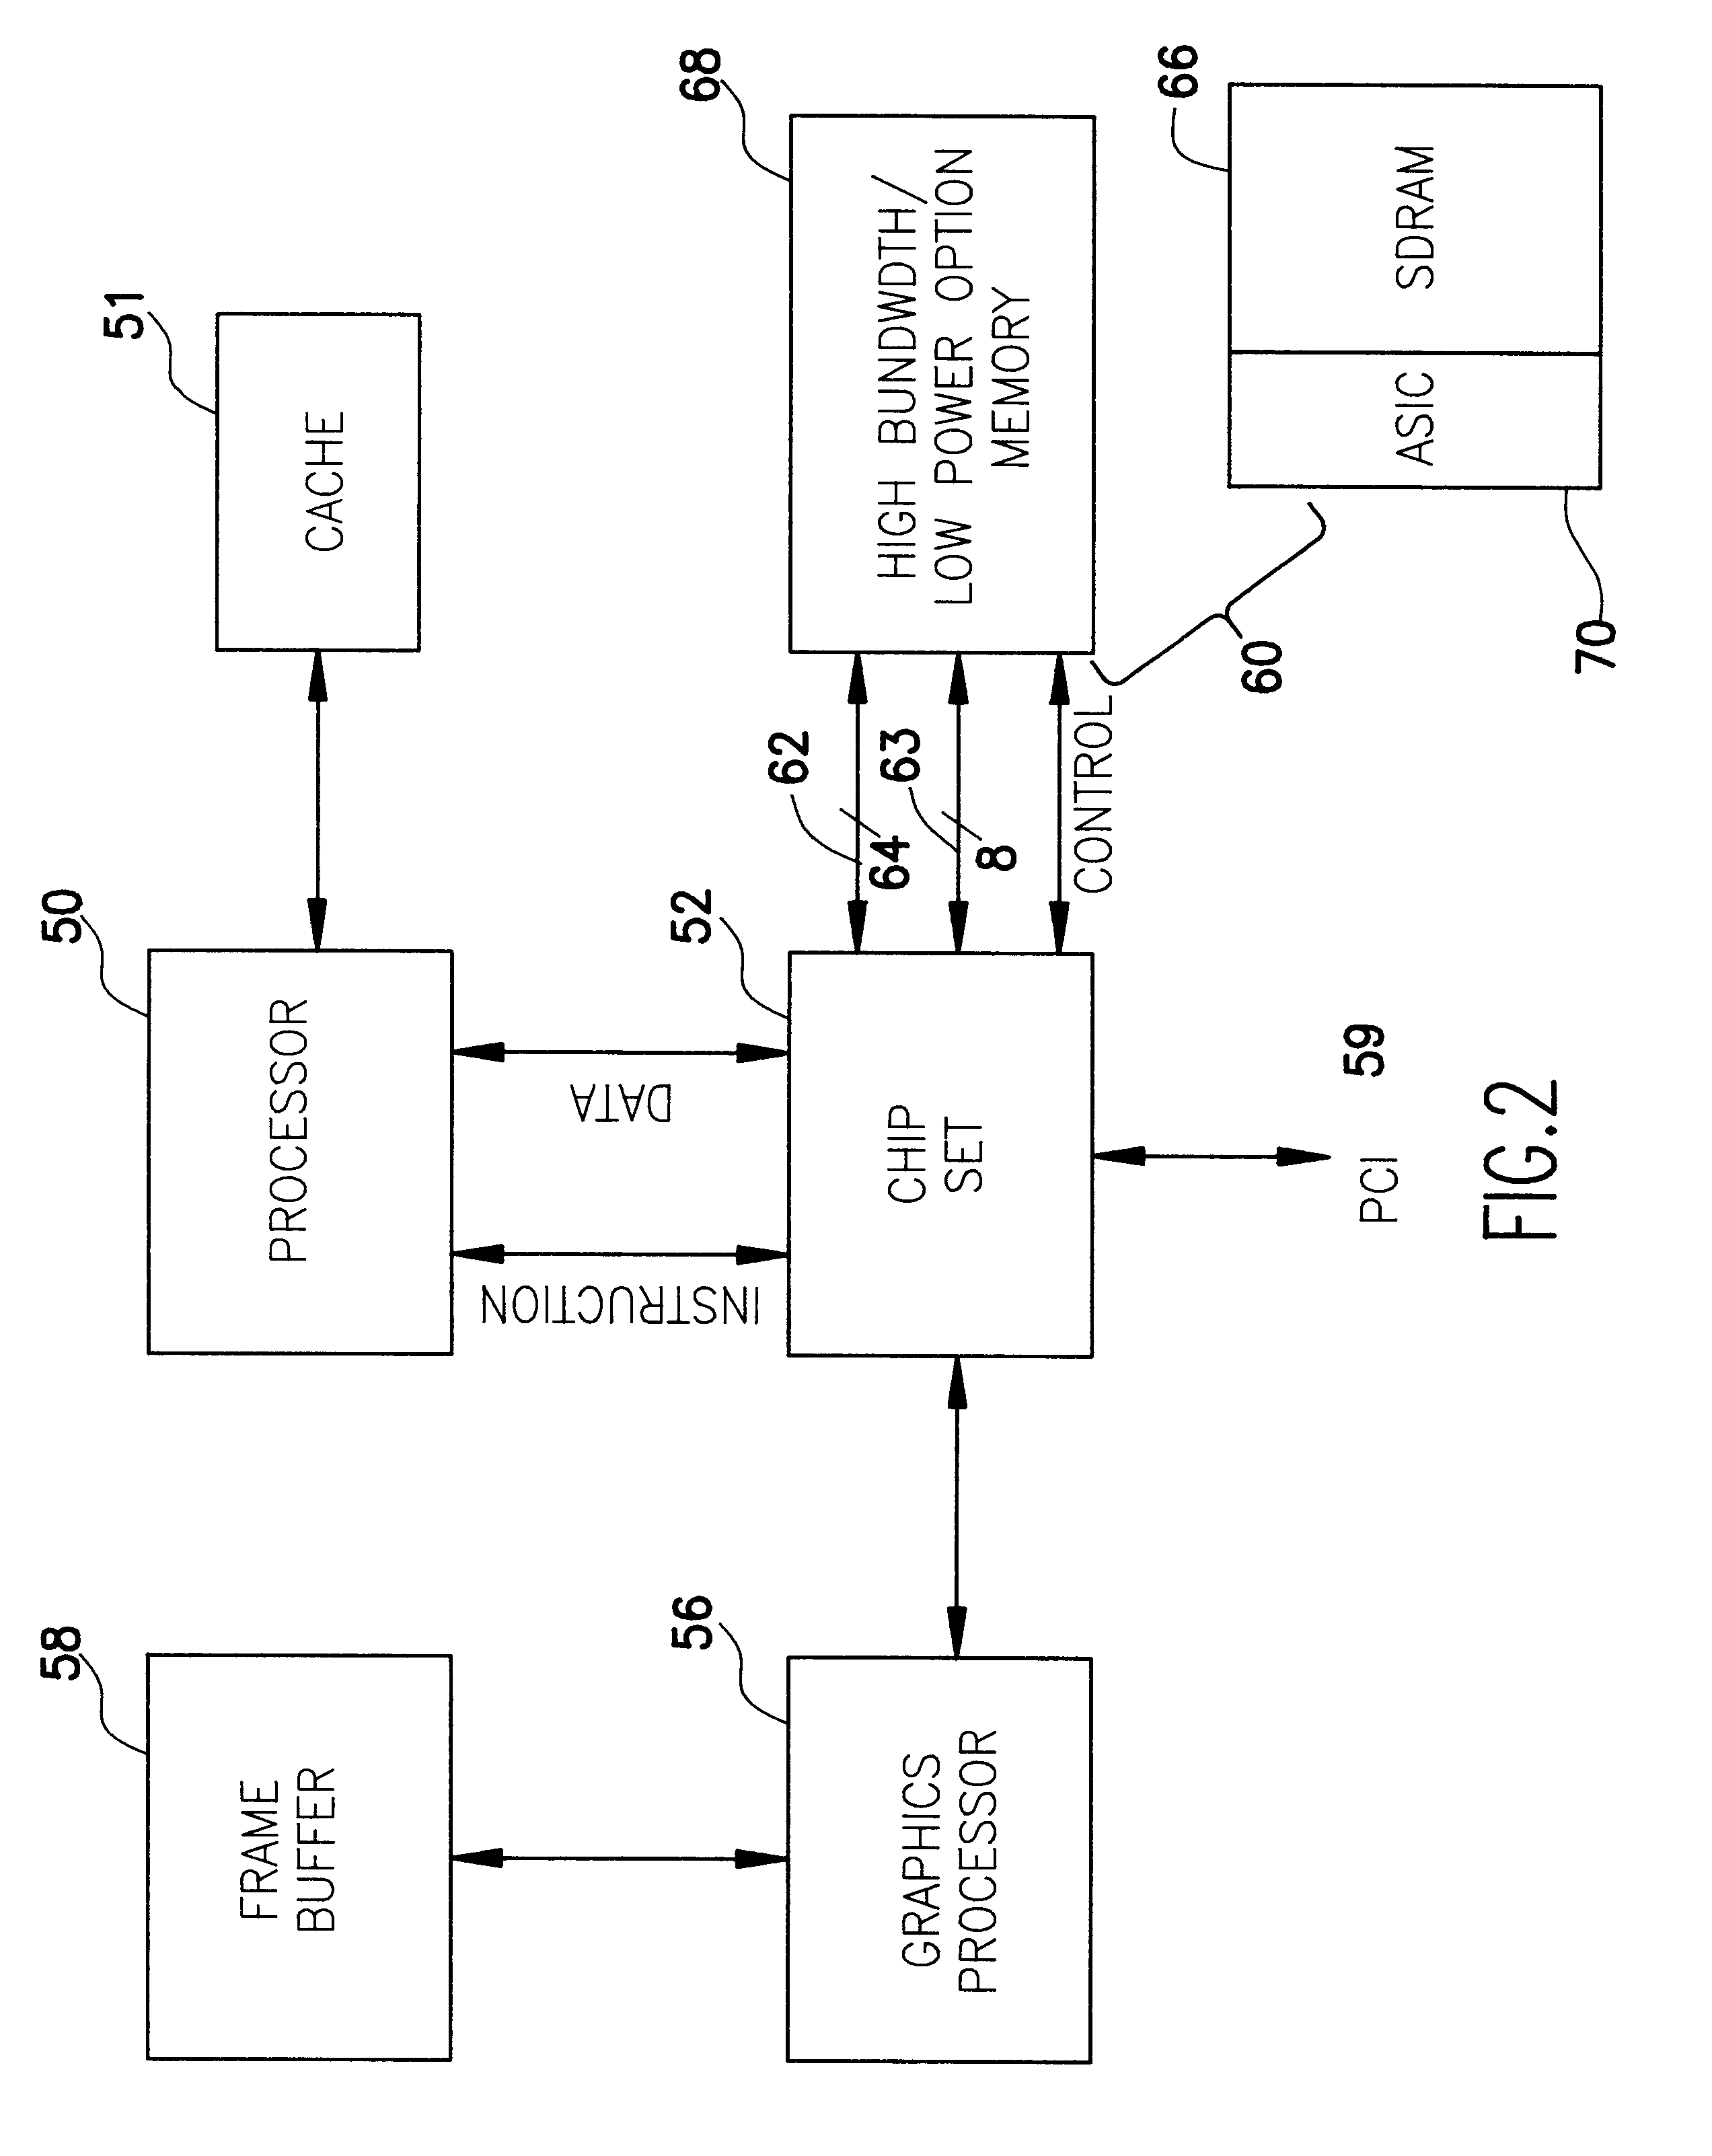 High bandwidth DRAM with low operating power modes